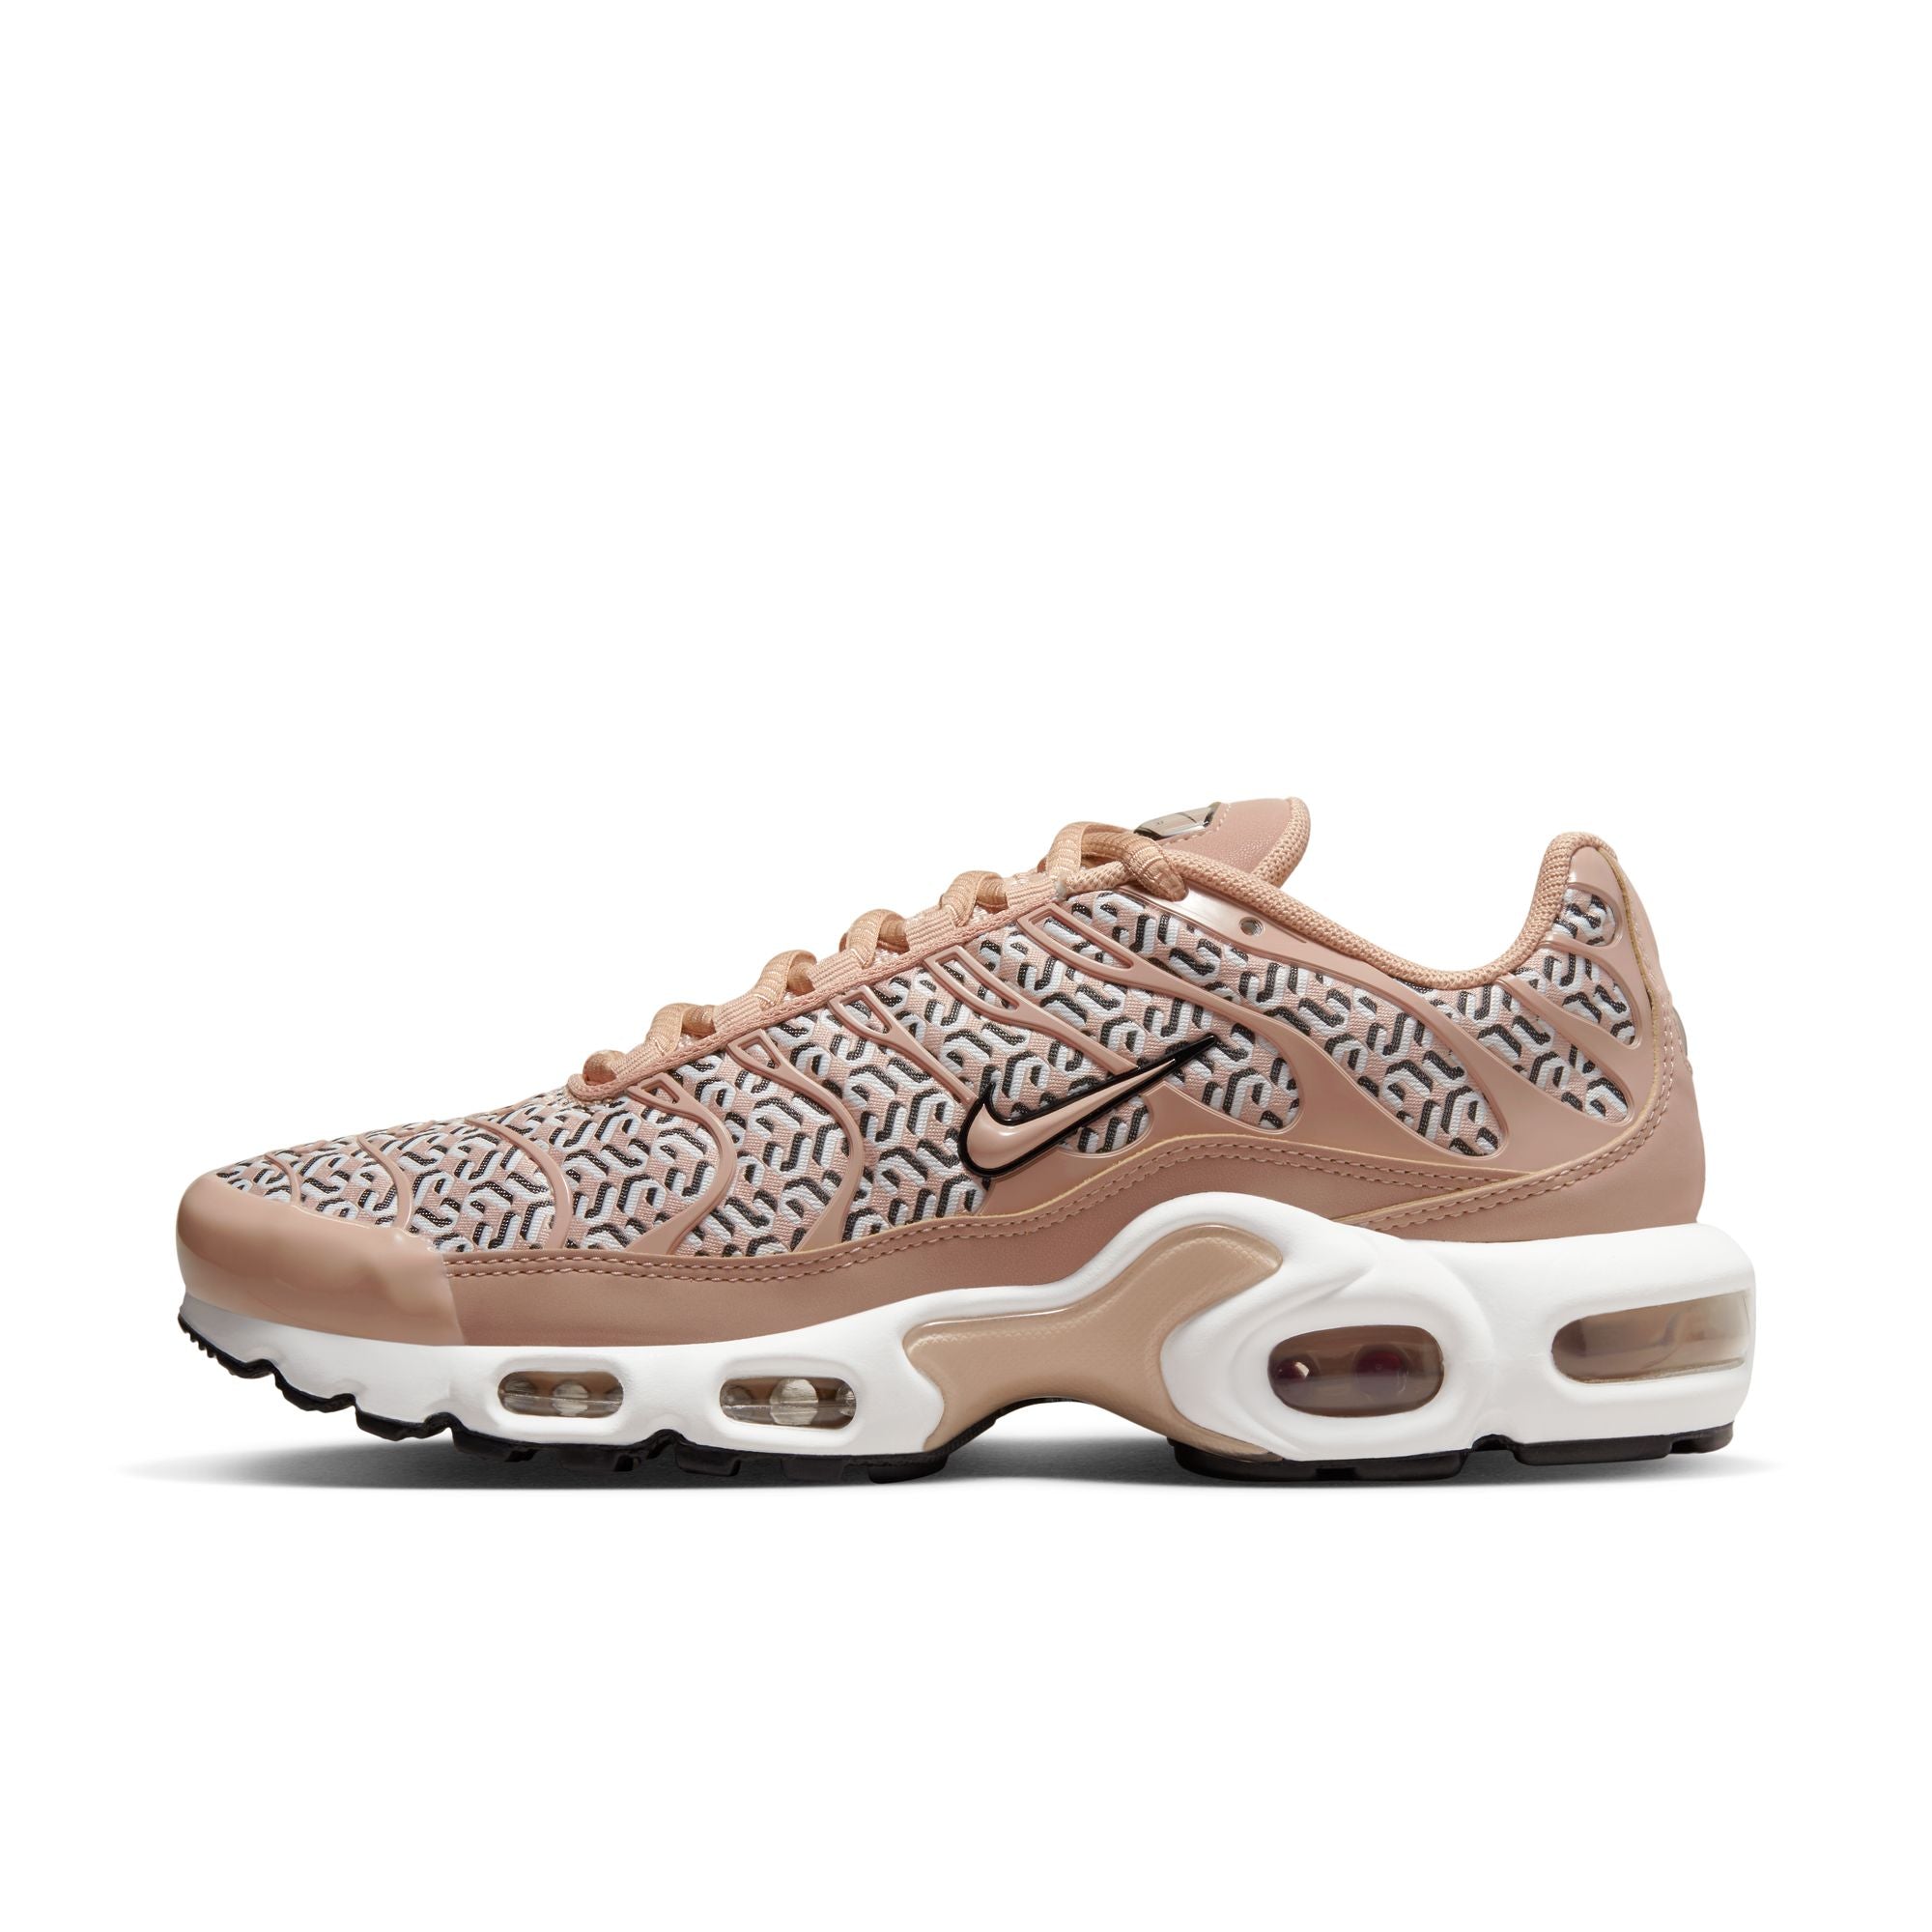 Nike Air Max Shoes - Buy Latest Nike Air Max Shoes for Men & Women Online |  Superkicks